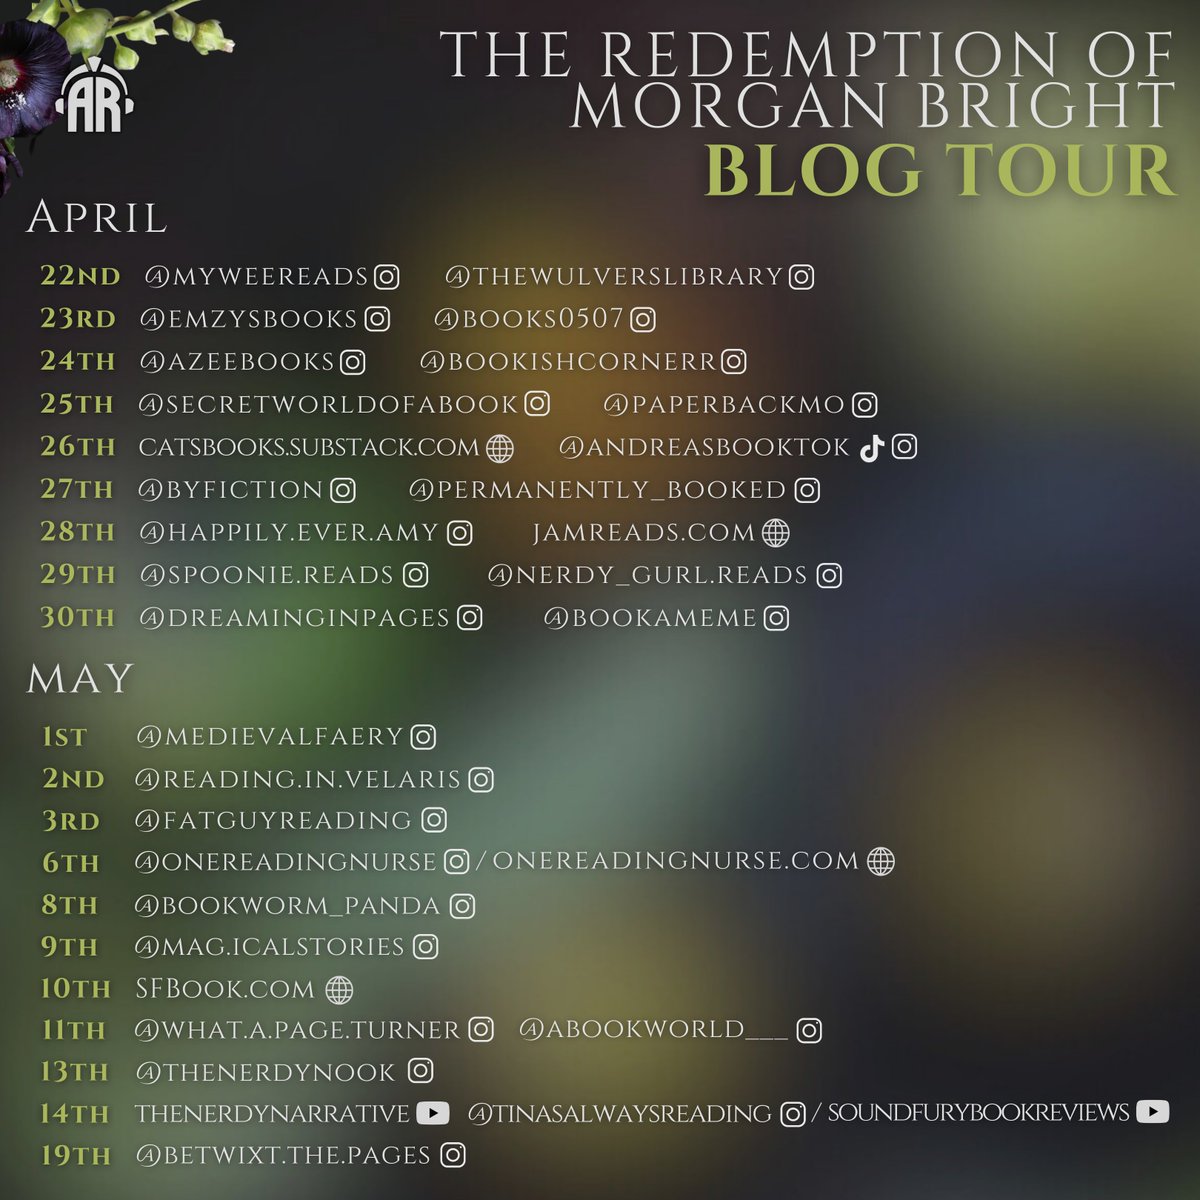 📢Blog Tour Klaxon📢

@ChrisJPanatier's 'The Redemption of Morgan Bright' is horror in all its parts, the story, the characters, even the very structure of the book itself. Hard hitting horror.

Out now. Read the @sfbook review: sfbook.com/the-redemption…

Thank you @angryrobotbooks